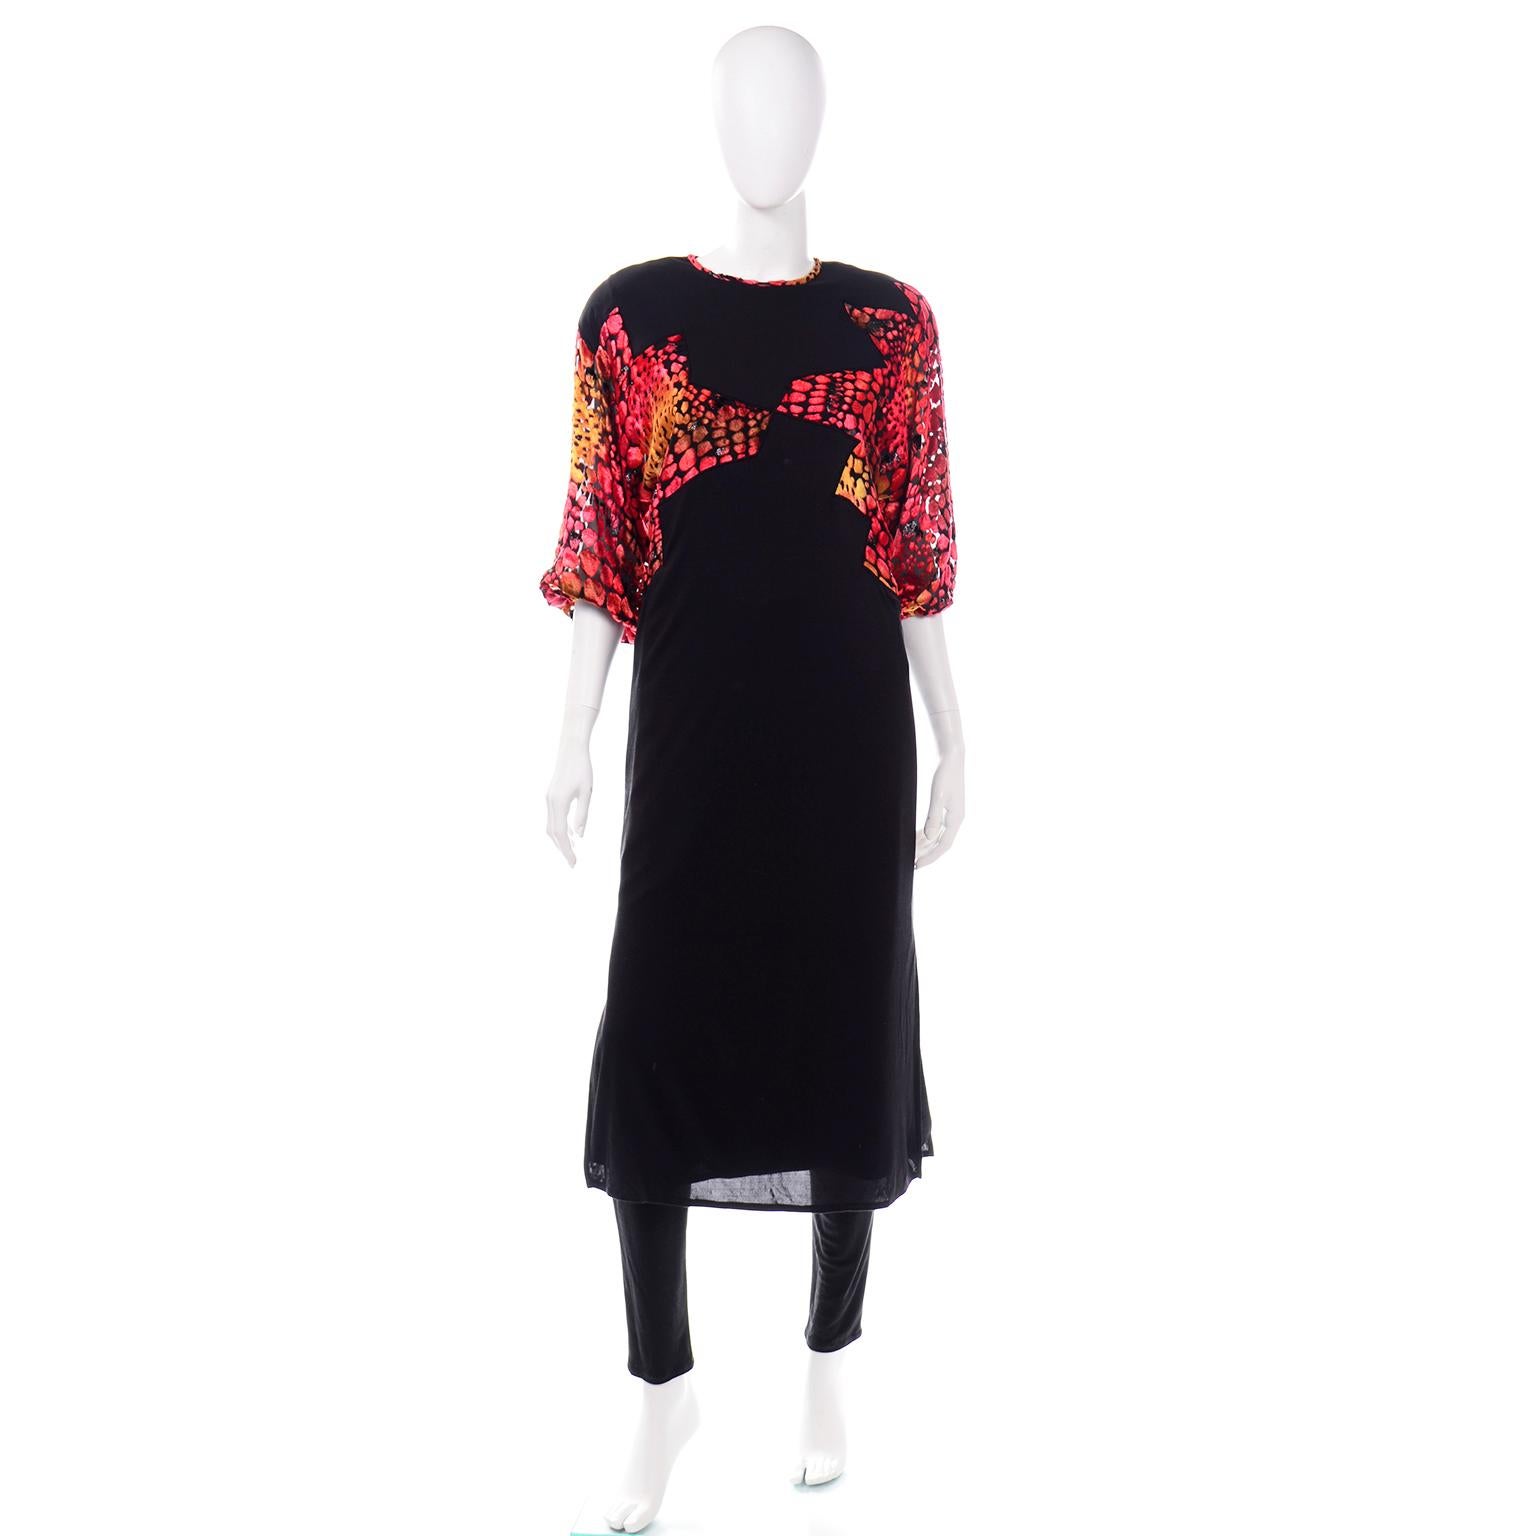 We absolutely love Diane Freis vintage pieces and this one is so unique! This vintage Diane Freis 2 piece evening ensemble is in a black silk jersey with velvet burnout accents in shades of red orange and yellow. The tunic style dress has black silk